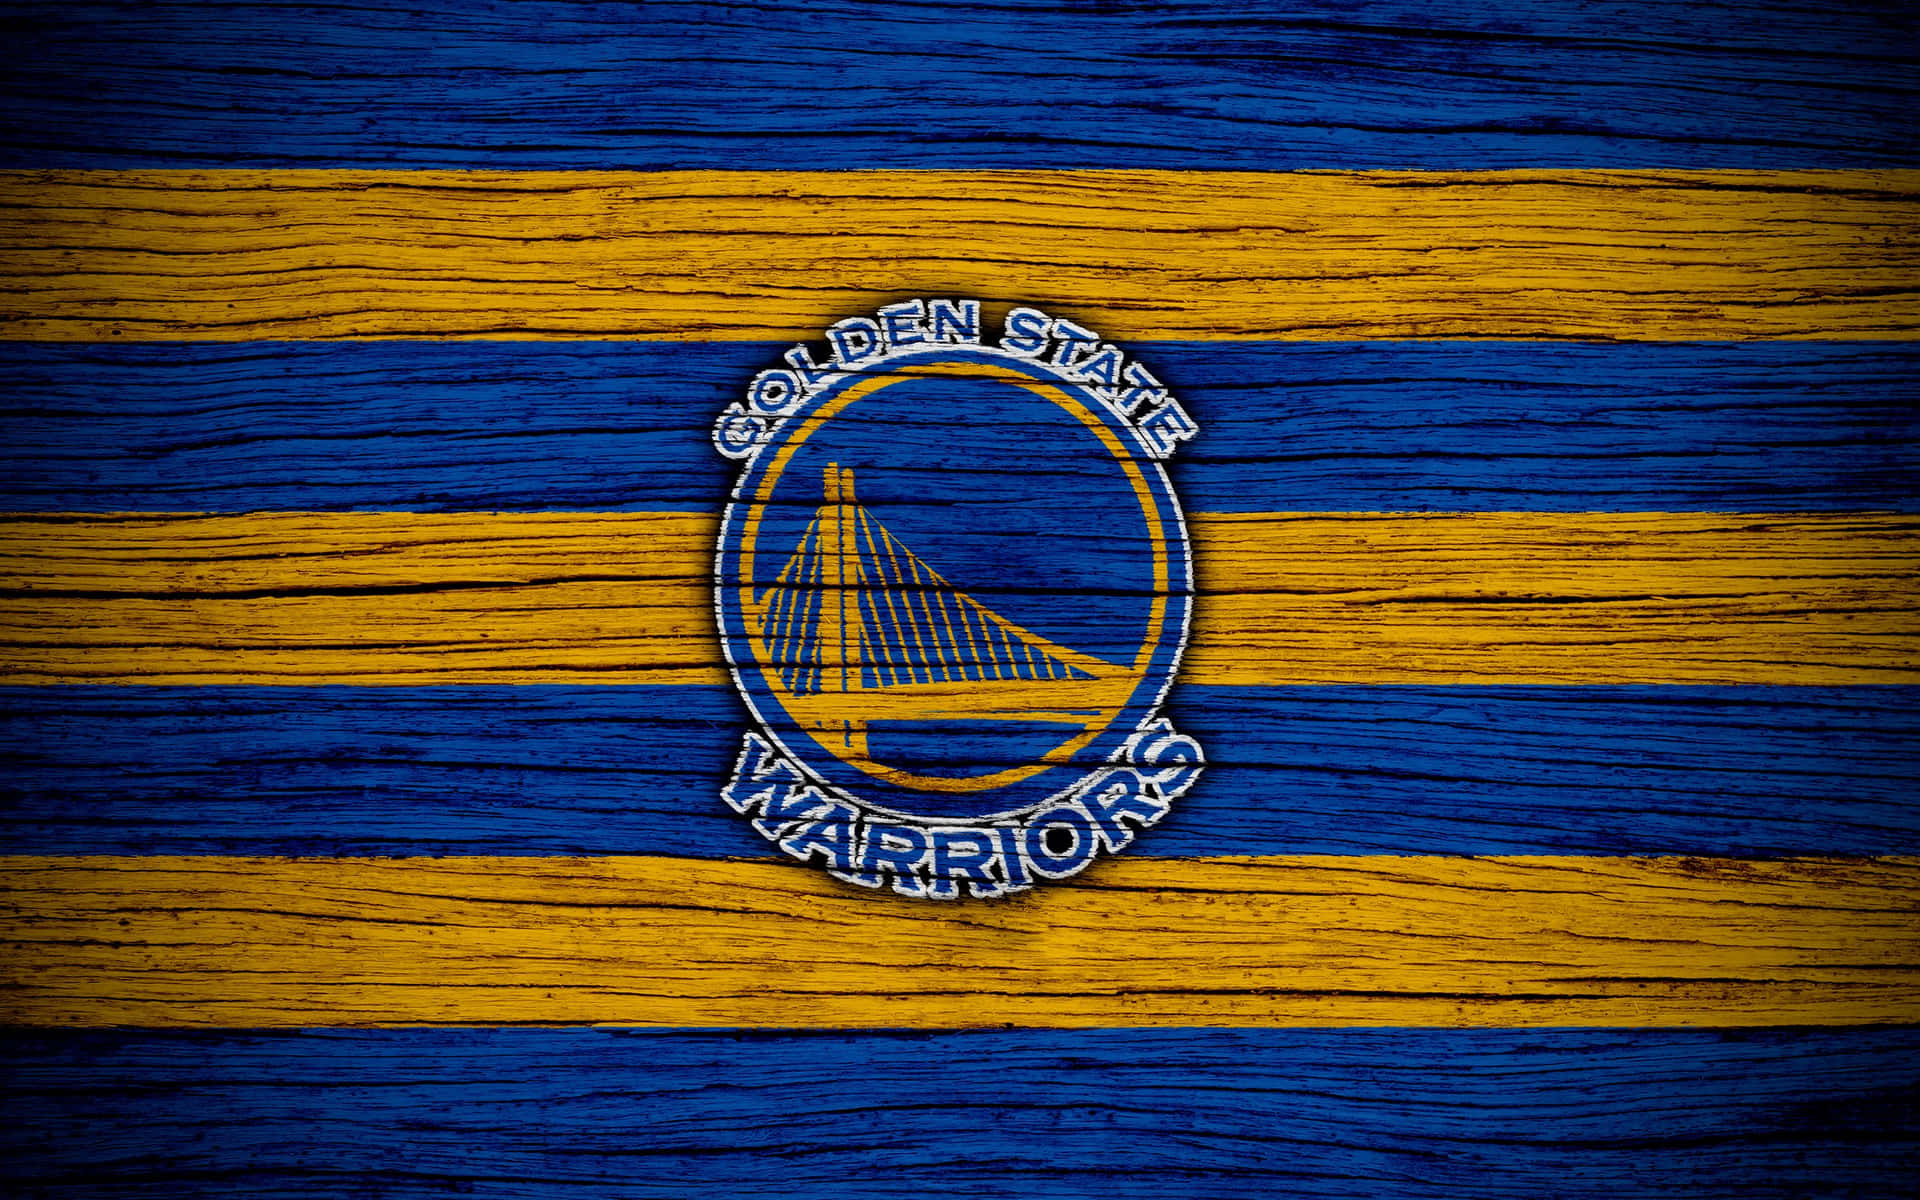 Golden State Warriors Logo On Striped Wood Surface Wallpaper